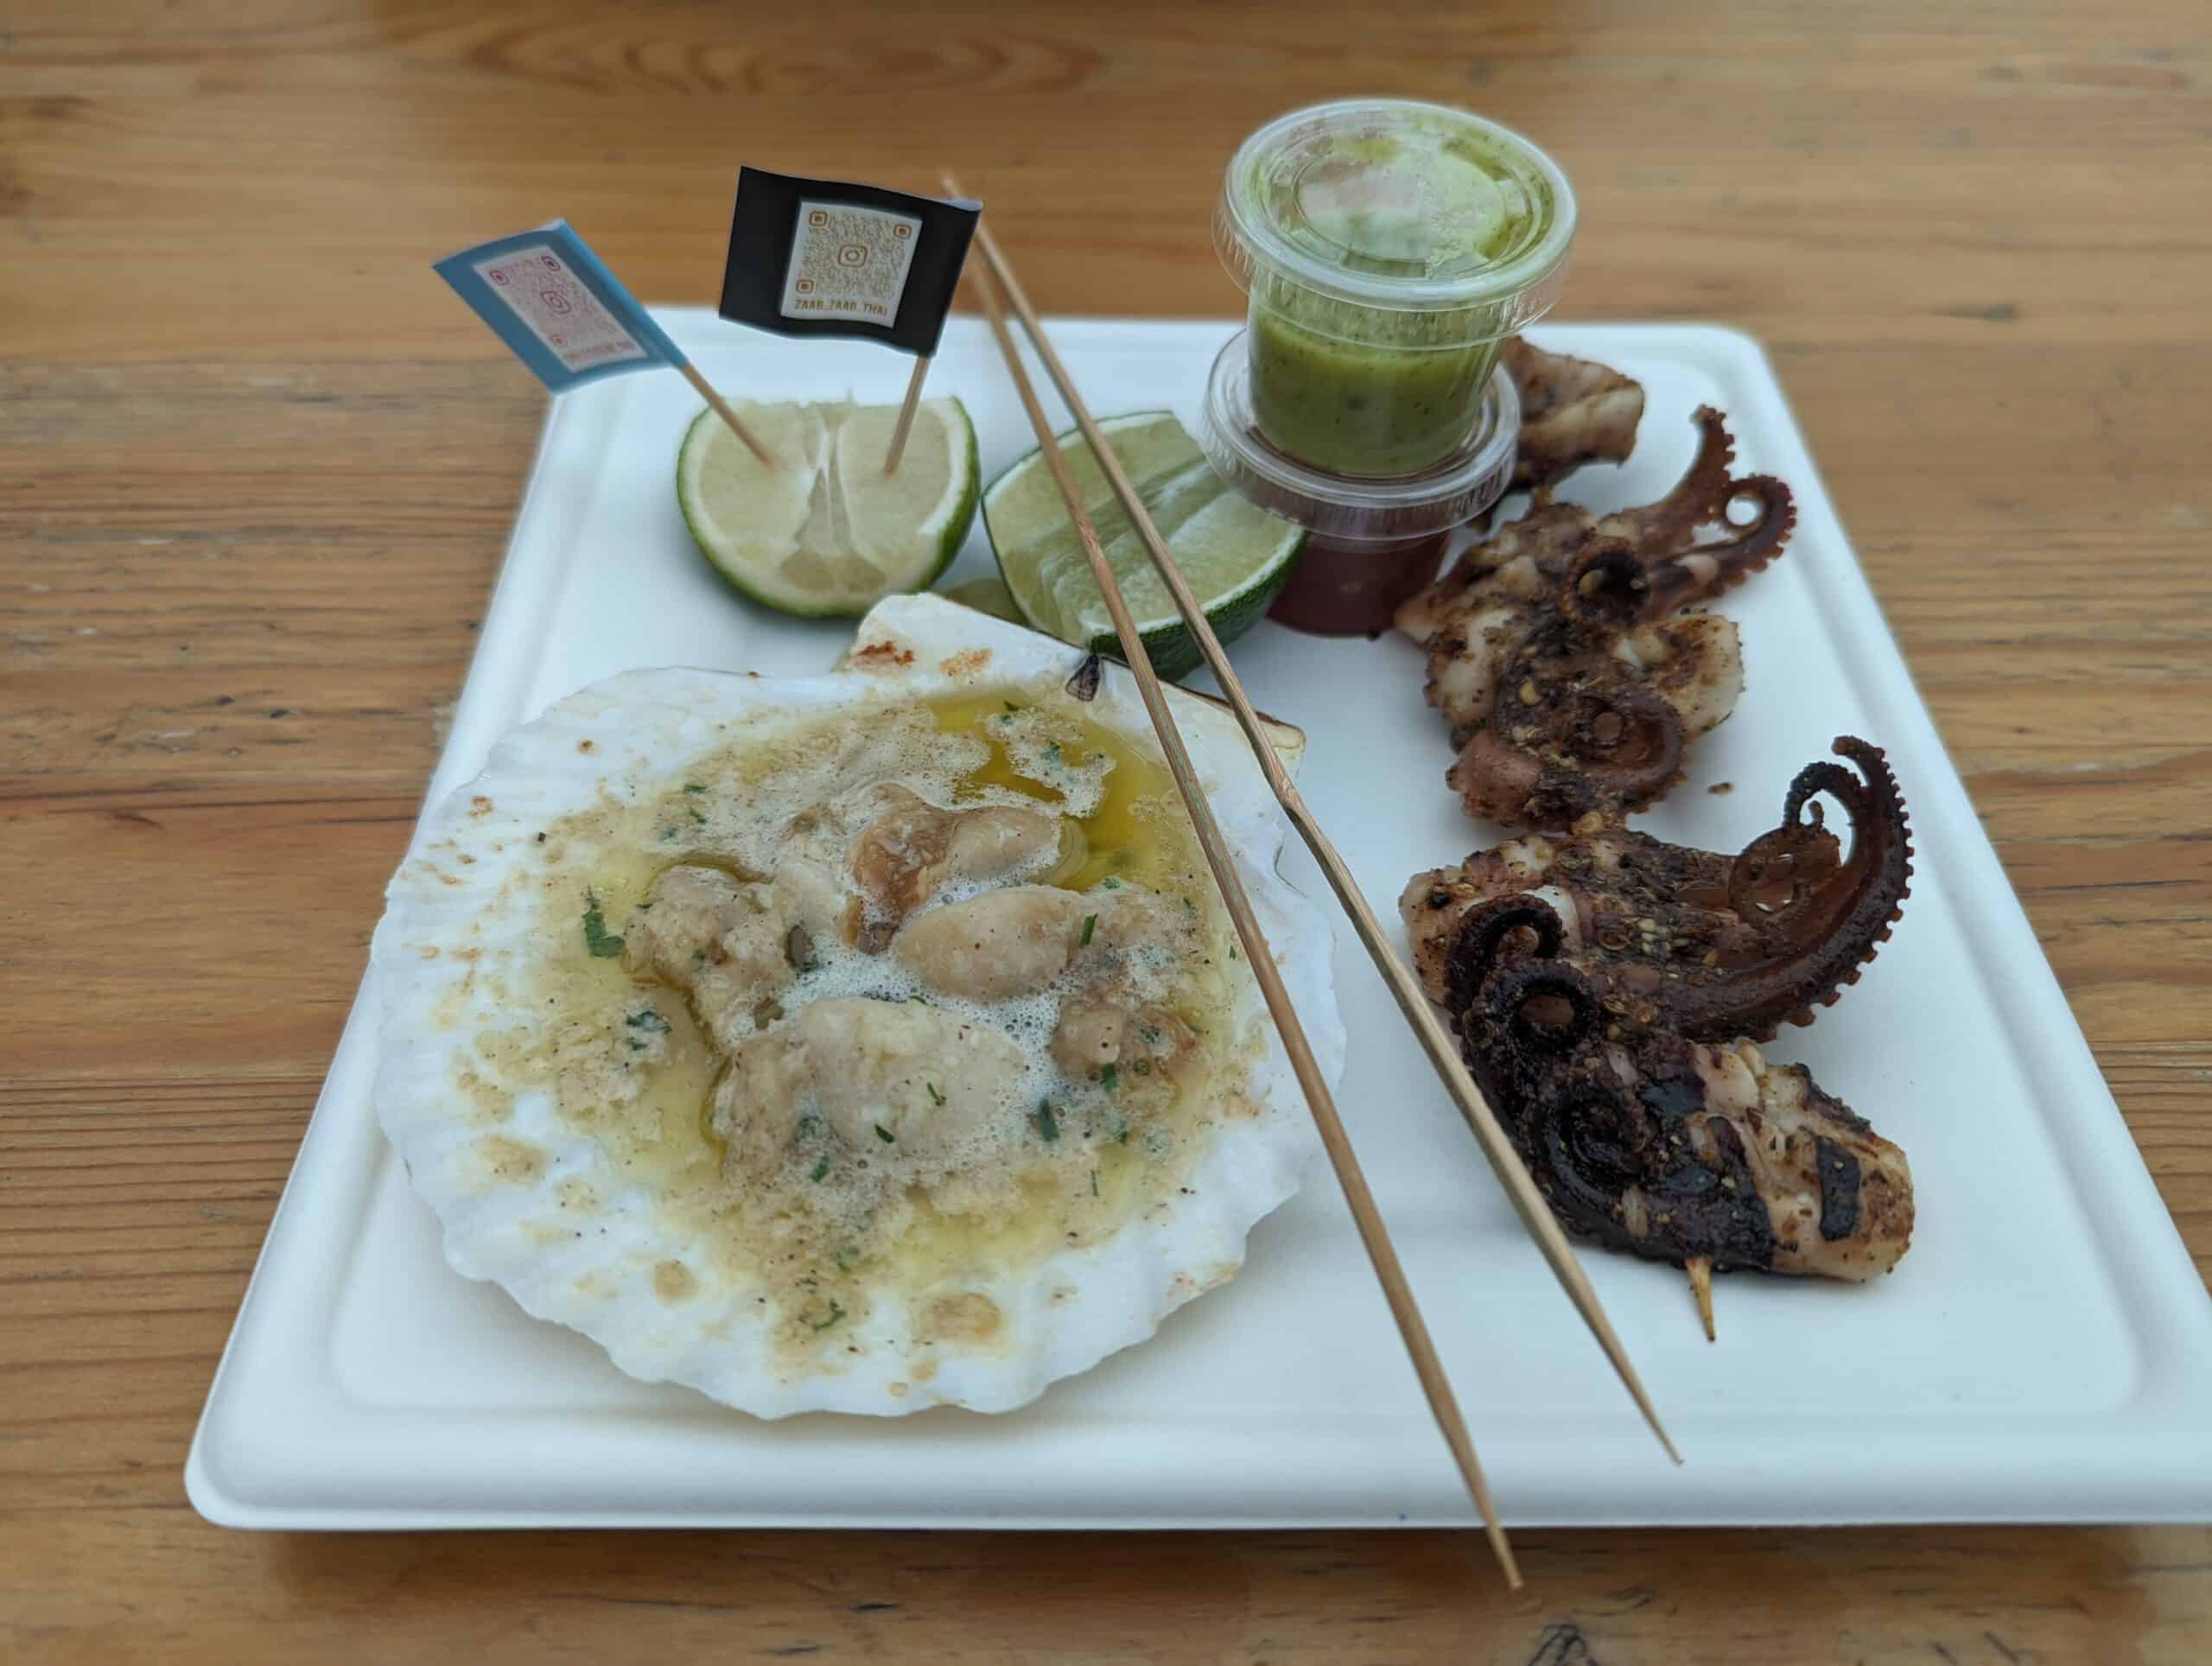 Tantalizing Grilled Octopus Skewers at Smile Cuisine | Cheap Eats Dubai 92